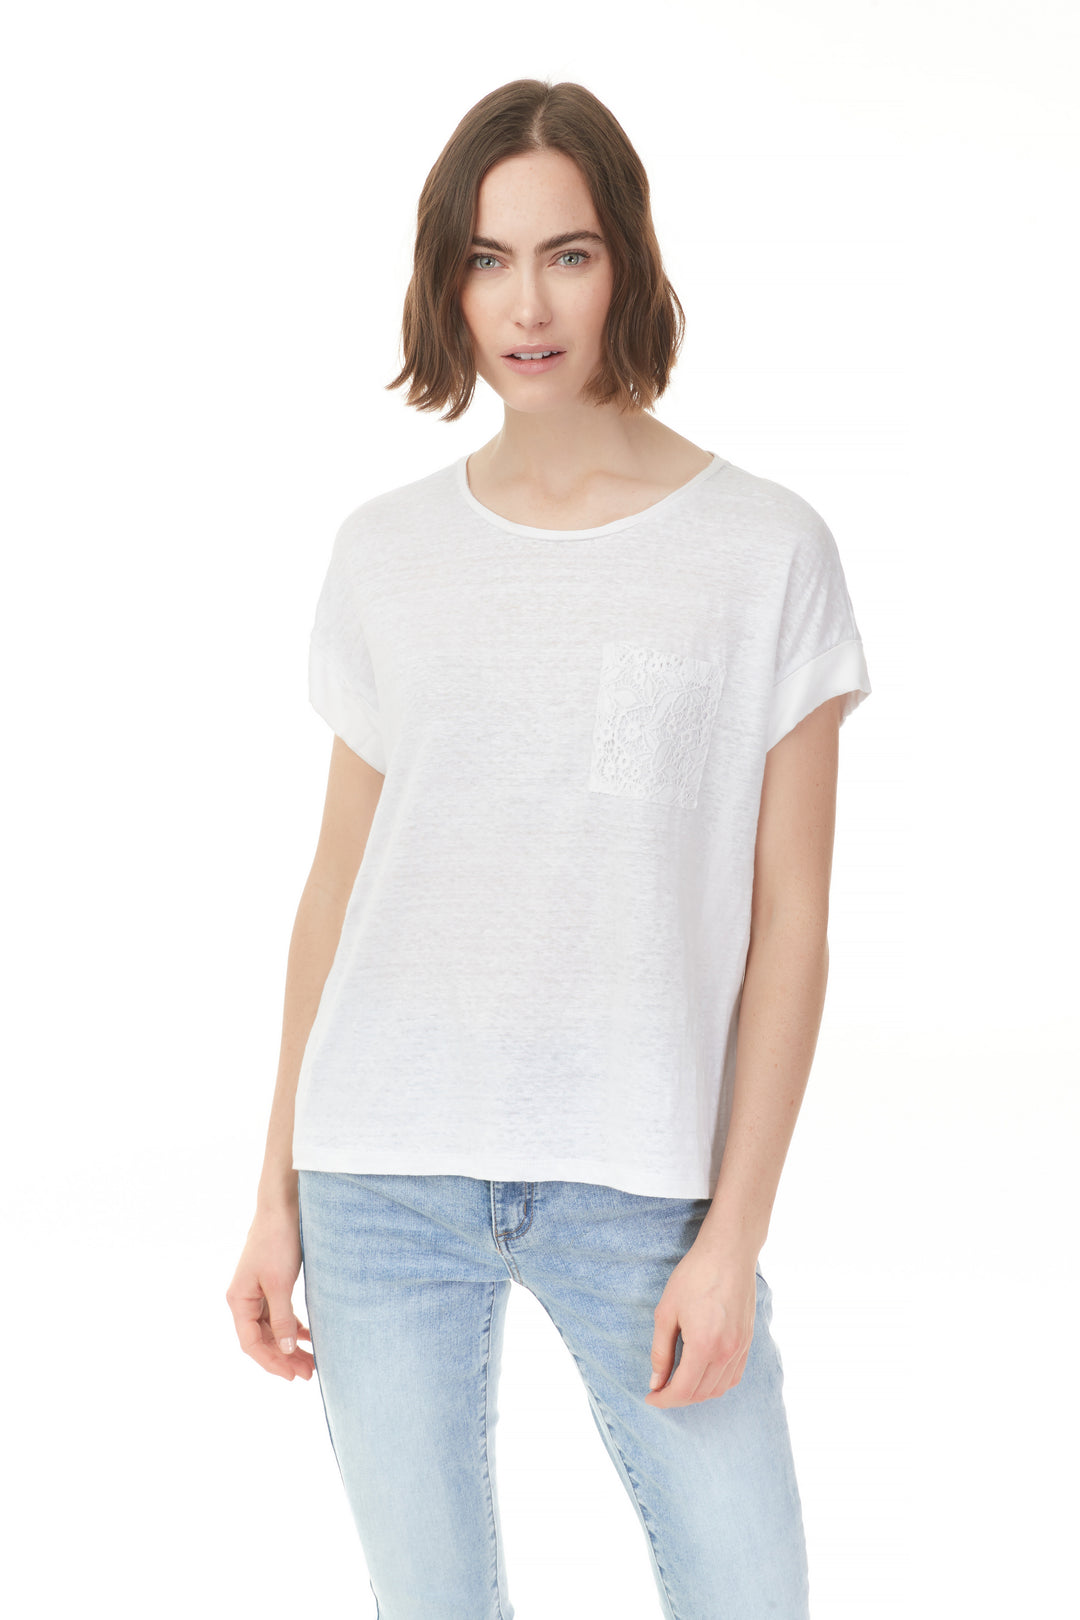 Charlie B Linen Top with Lace Pocket